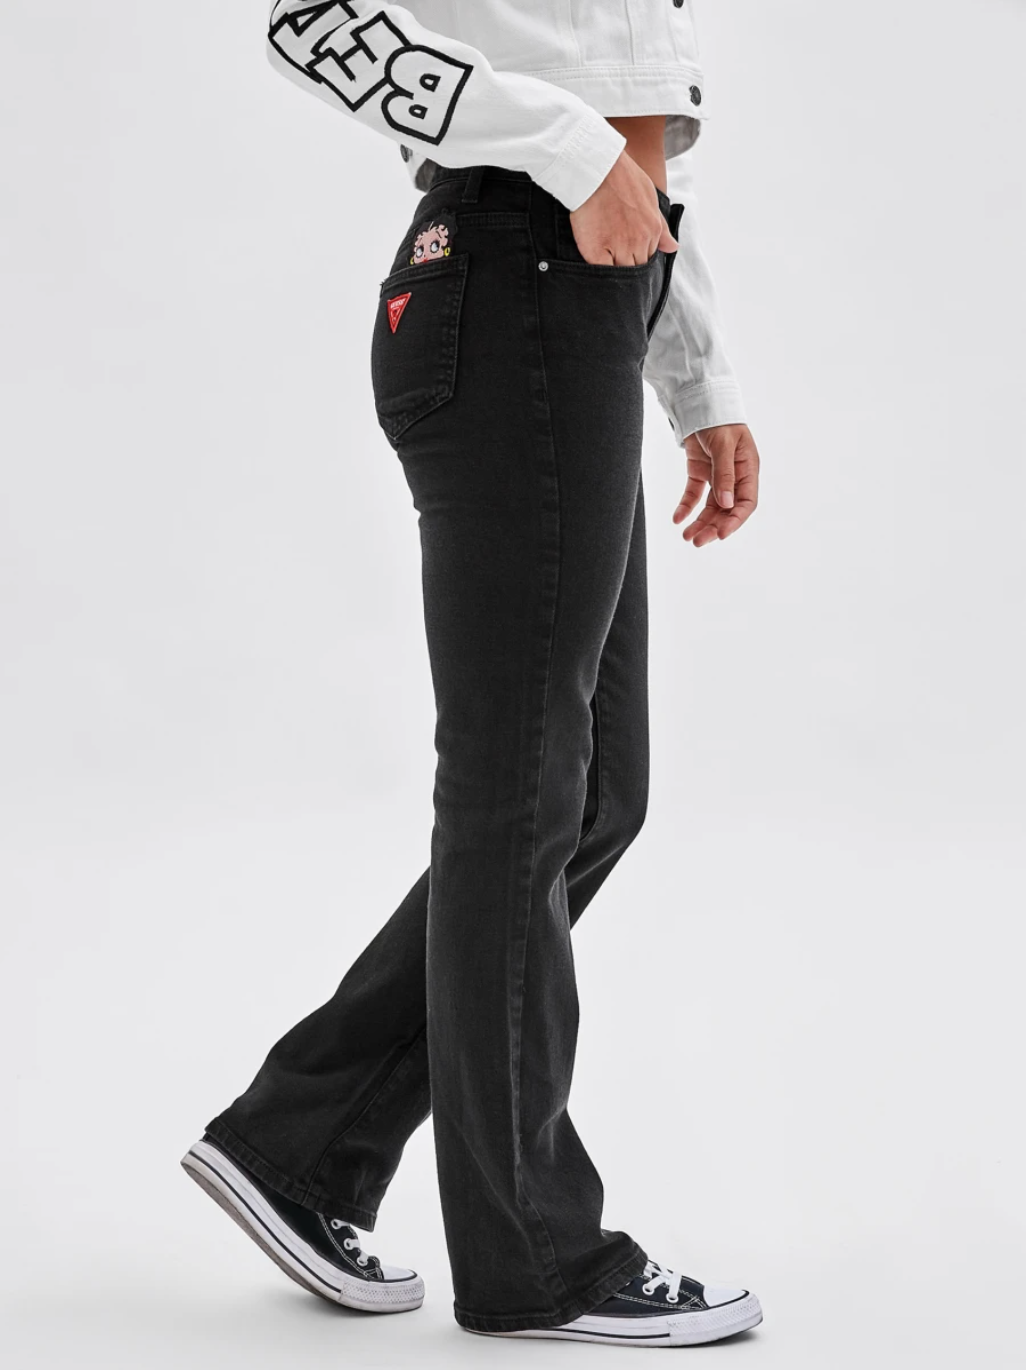 Jeans with a logo of Betty Boop over the back pocket